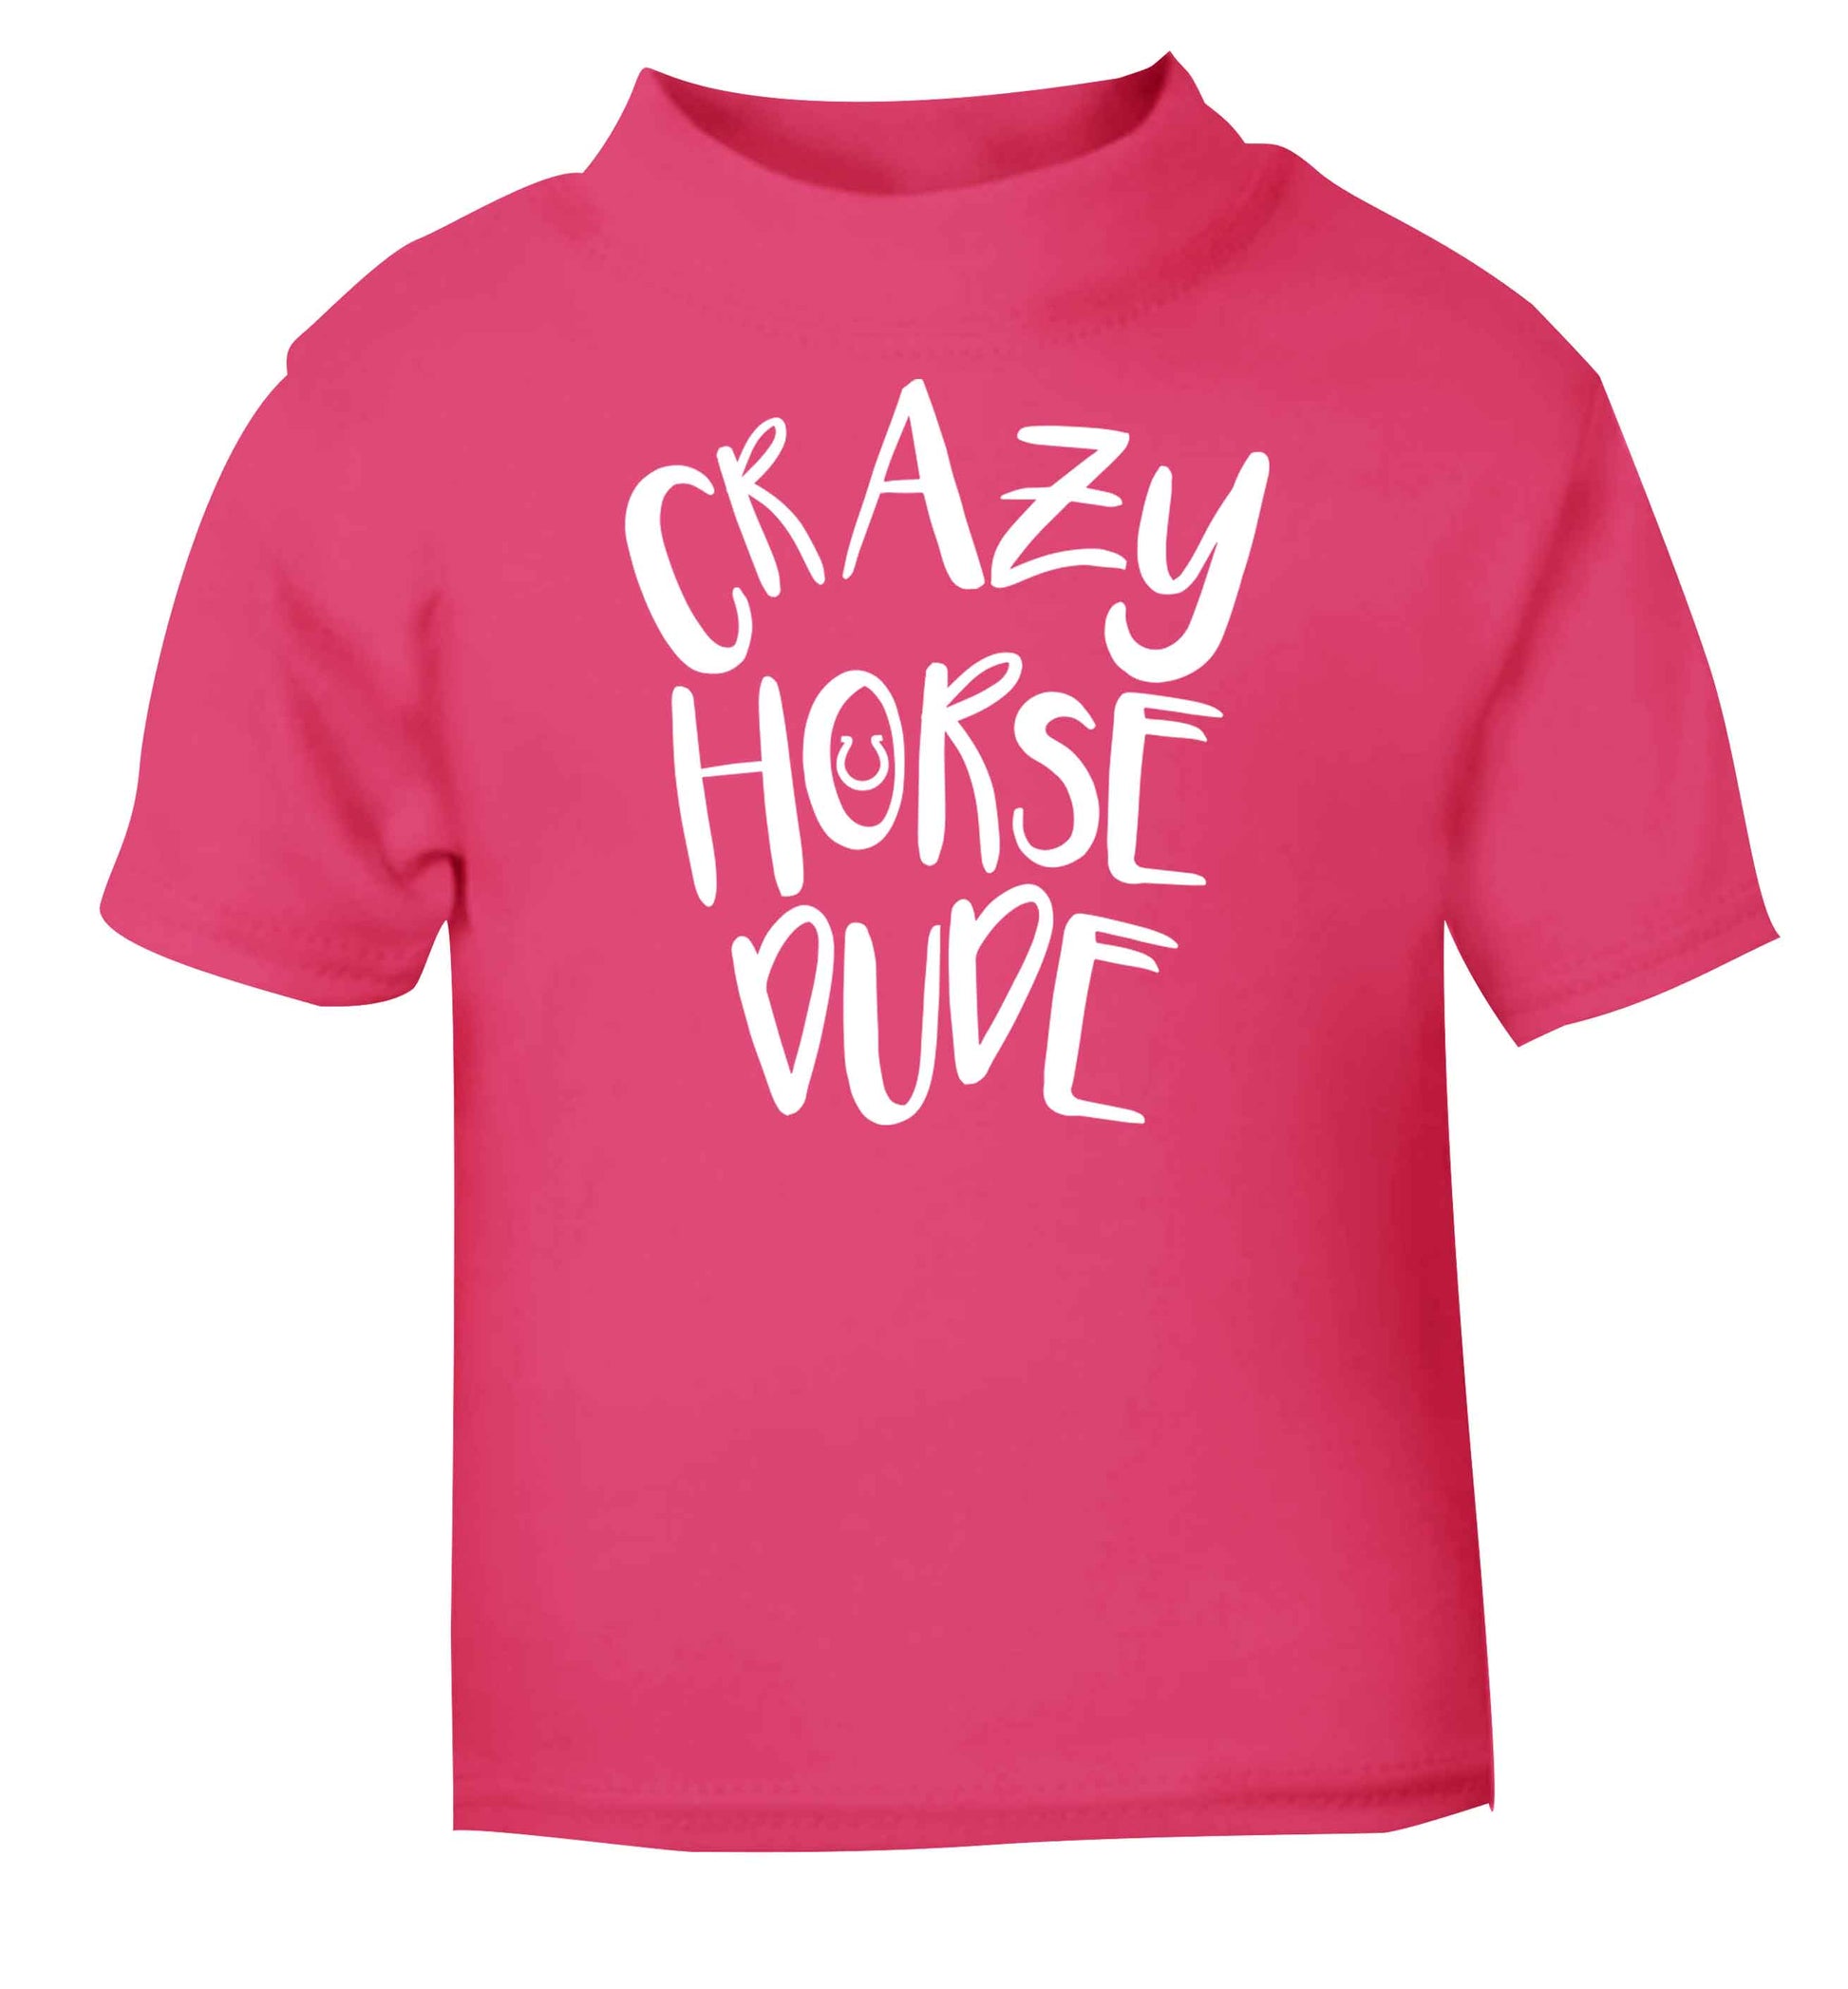 Crazy horse dude pink baby toddler Tshirt 2 Years